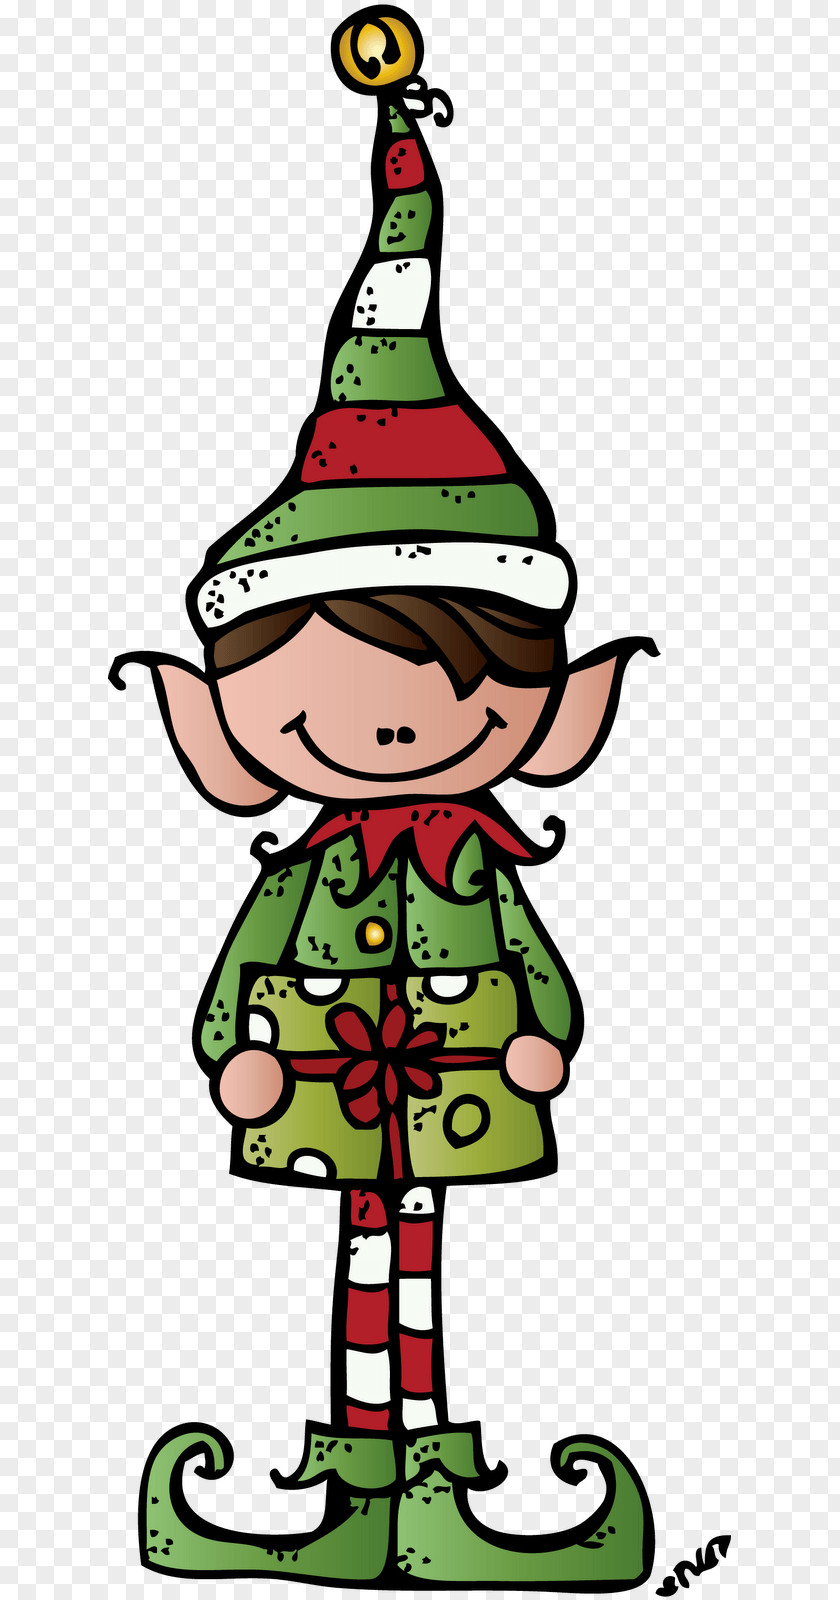 Santa Claus Christmas Graphics Clip Art The Elf On Shelf Day PNG